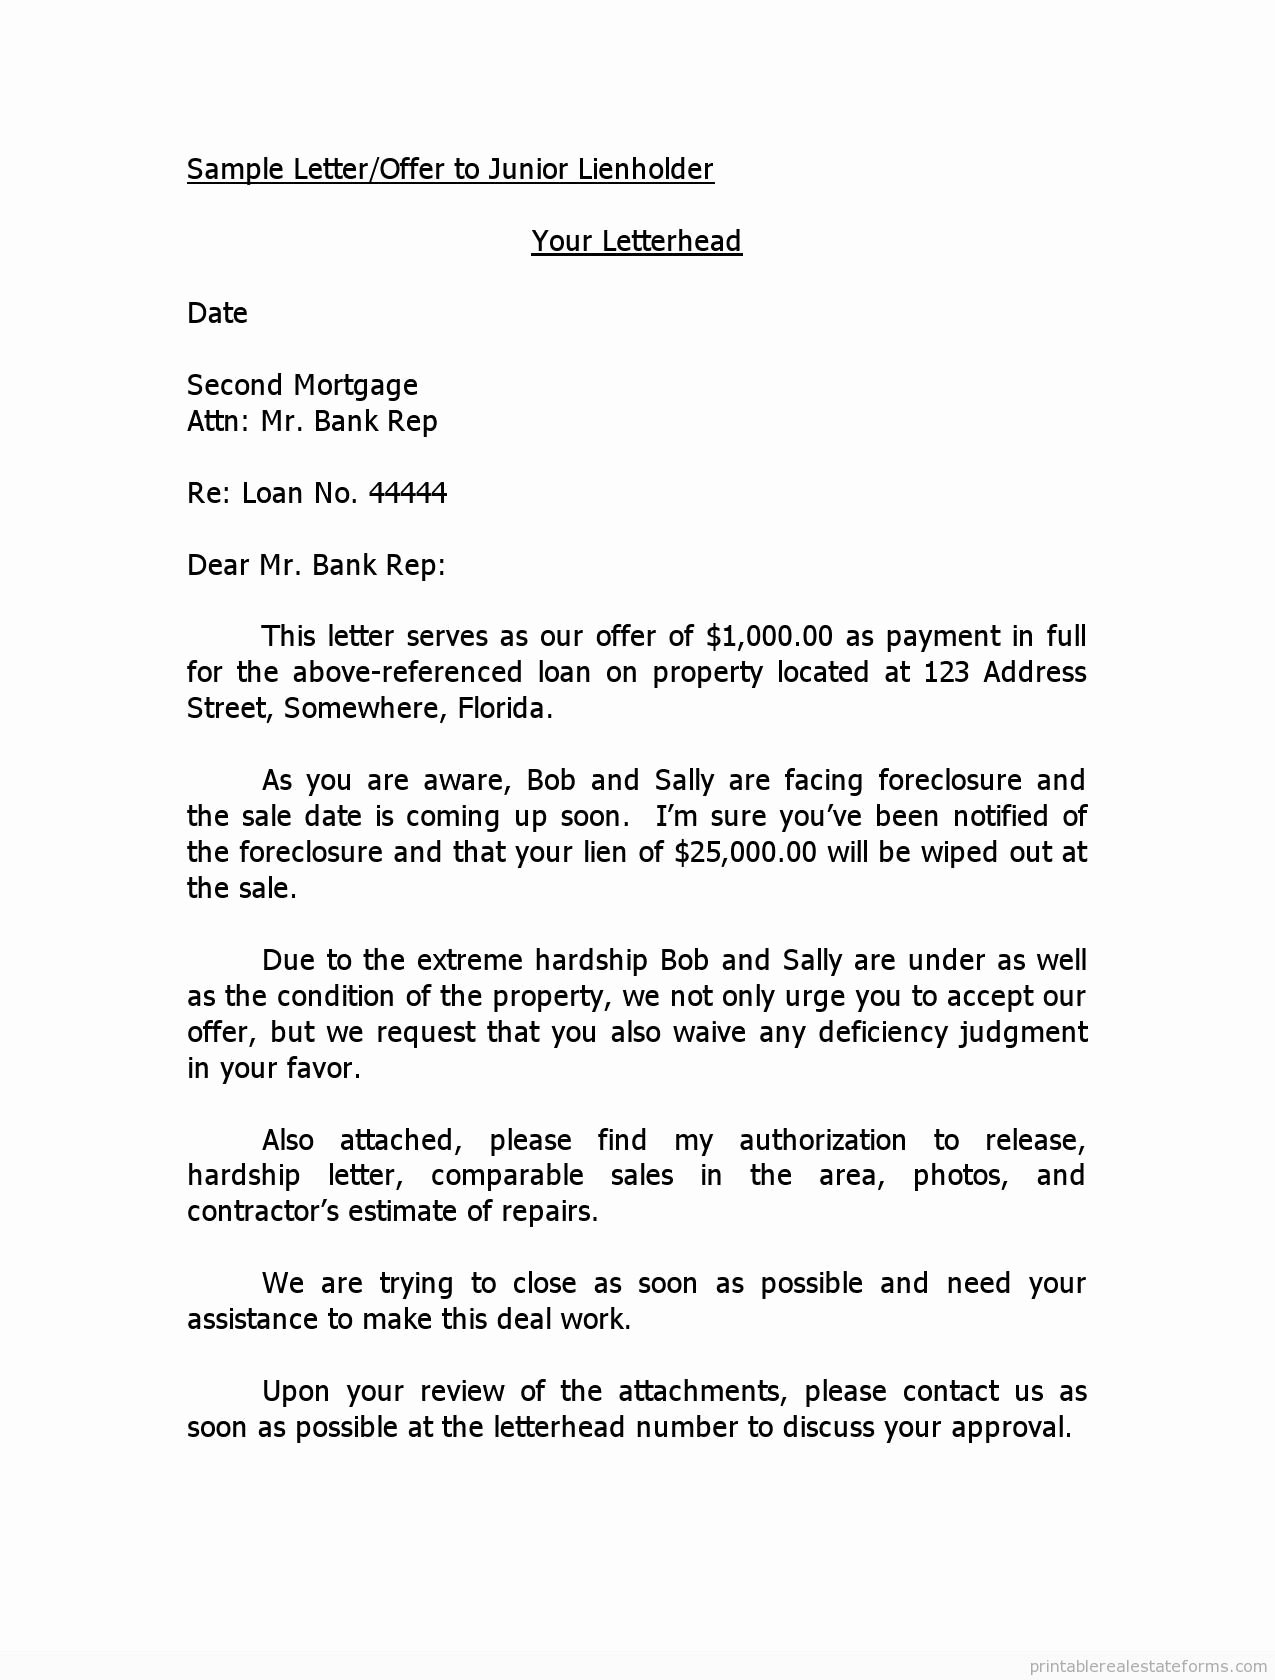 35 Sample Letter Of Explanation for Buying Second Home | Hamiltonplastering